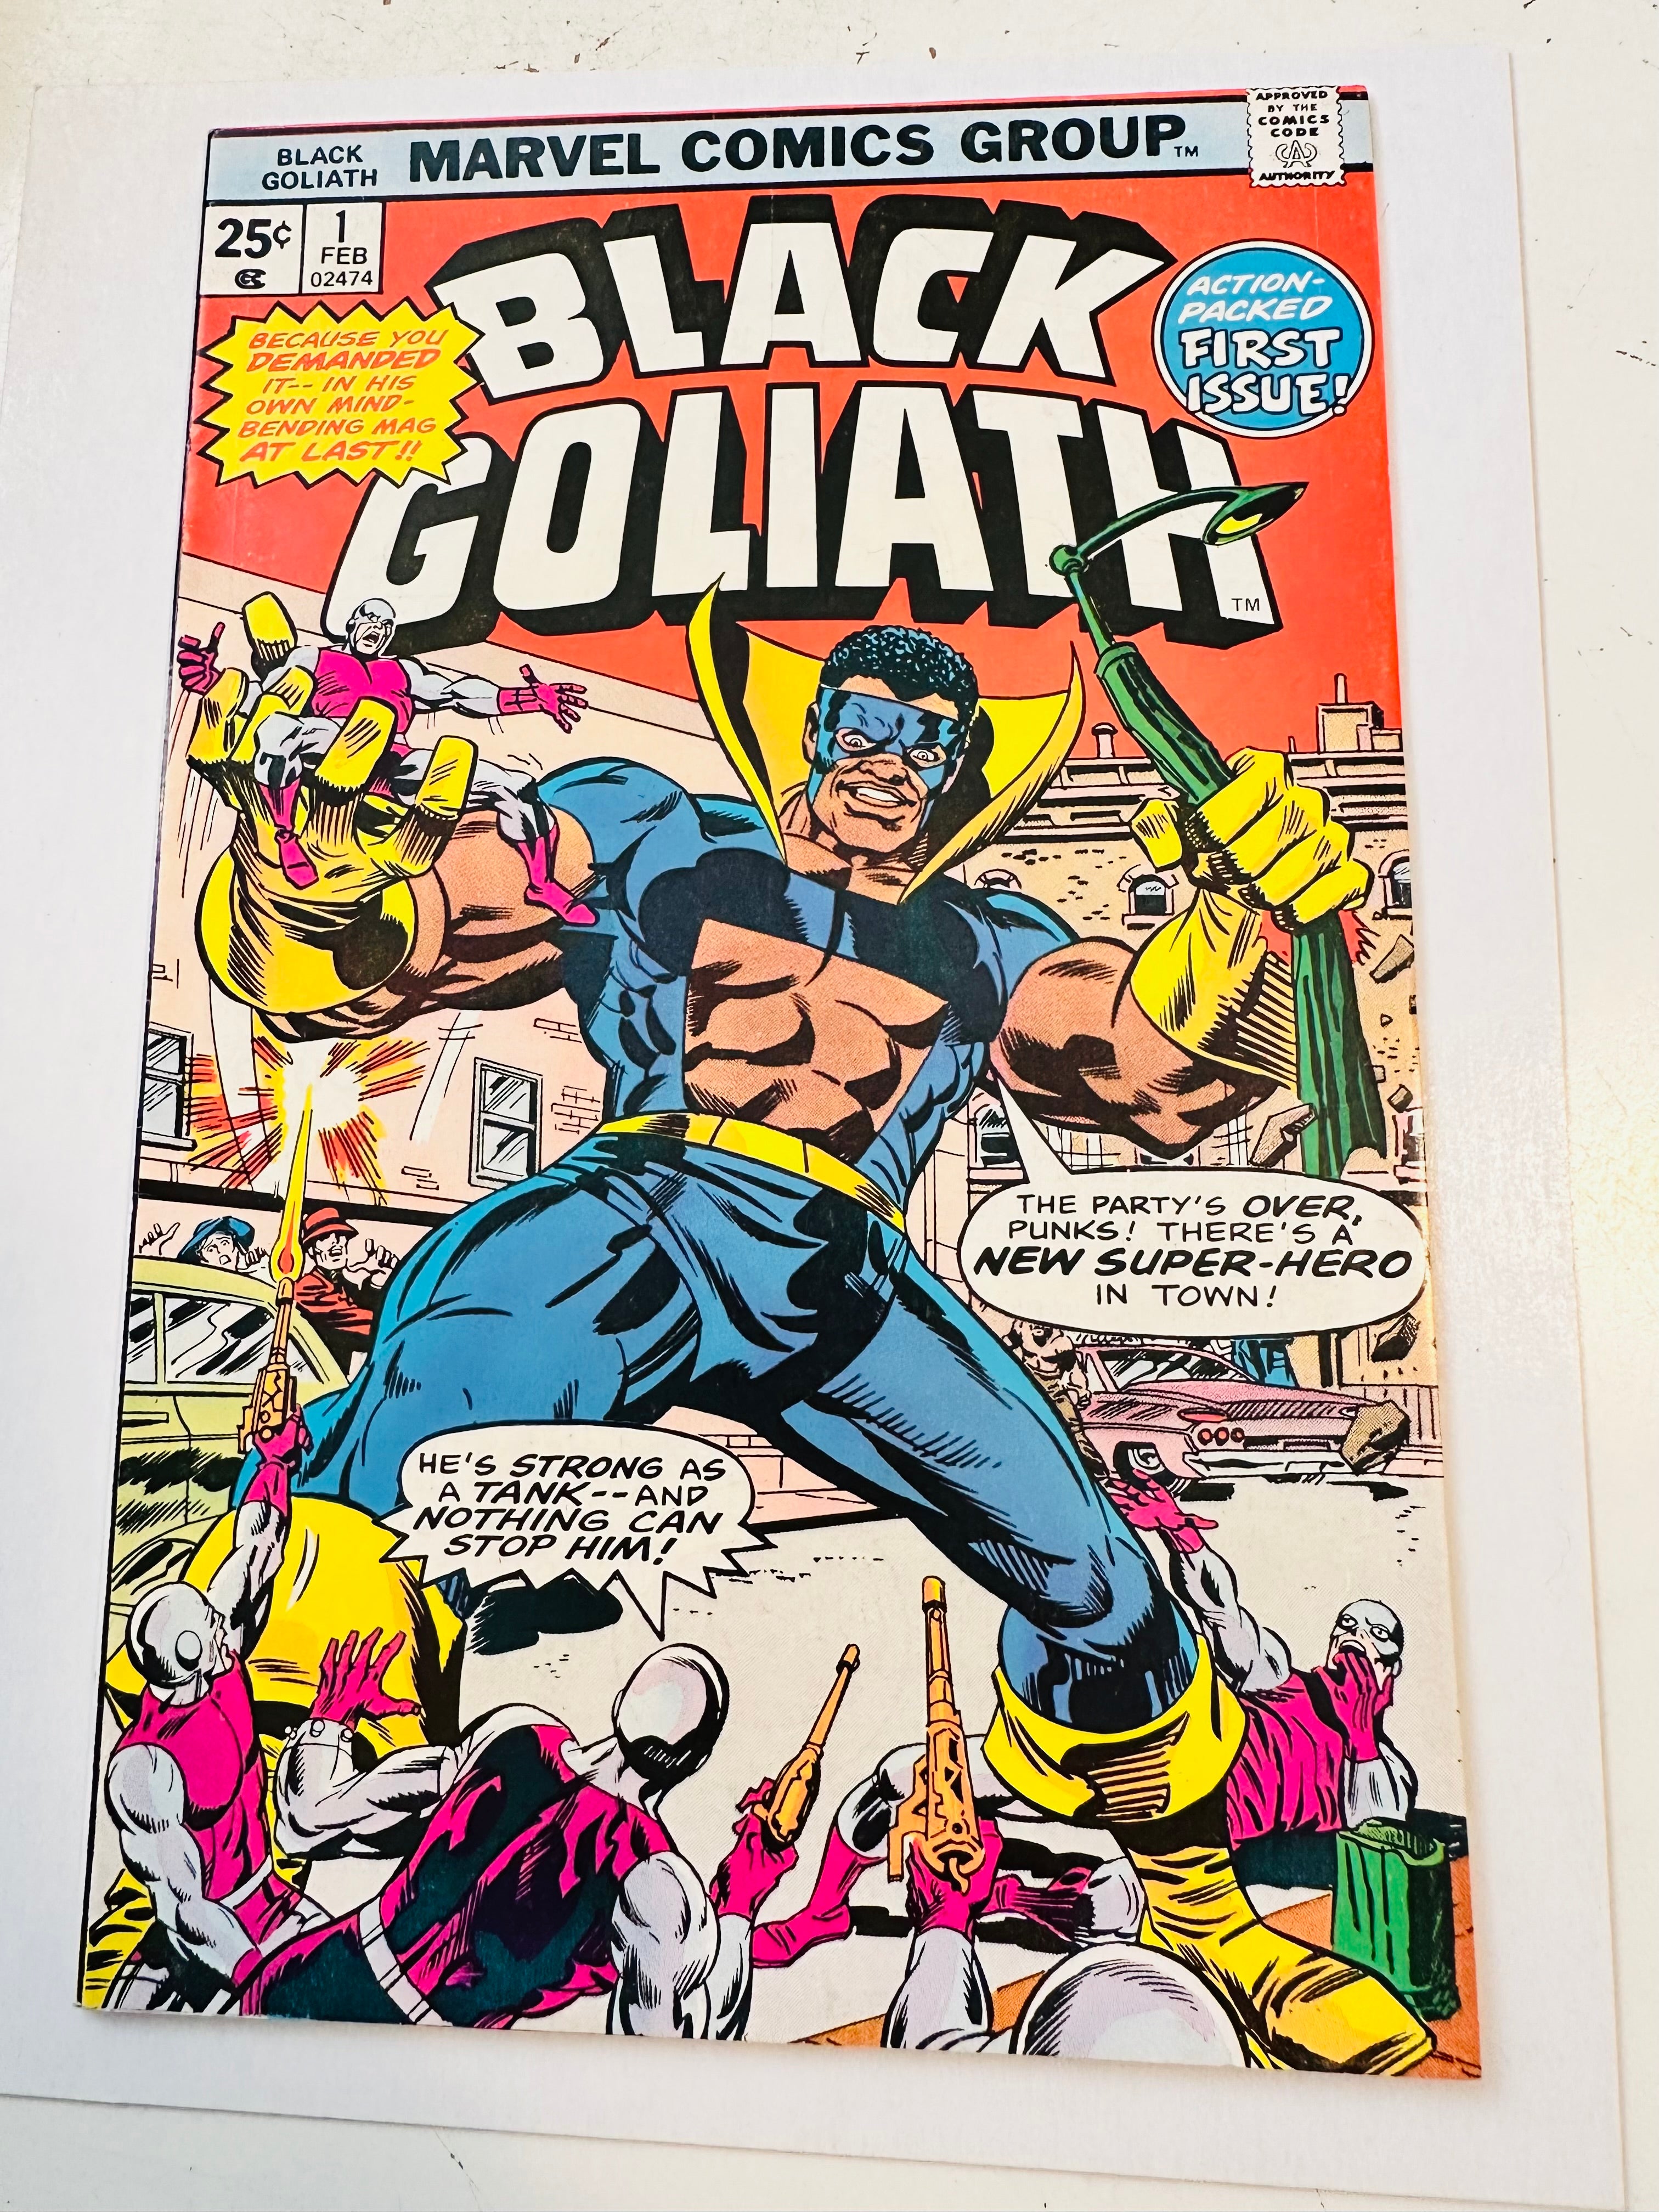 Black goliath #1 first issue fn/Vf condition comic book 1976